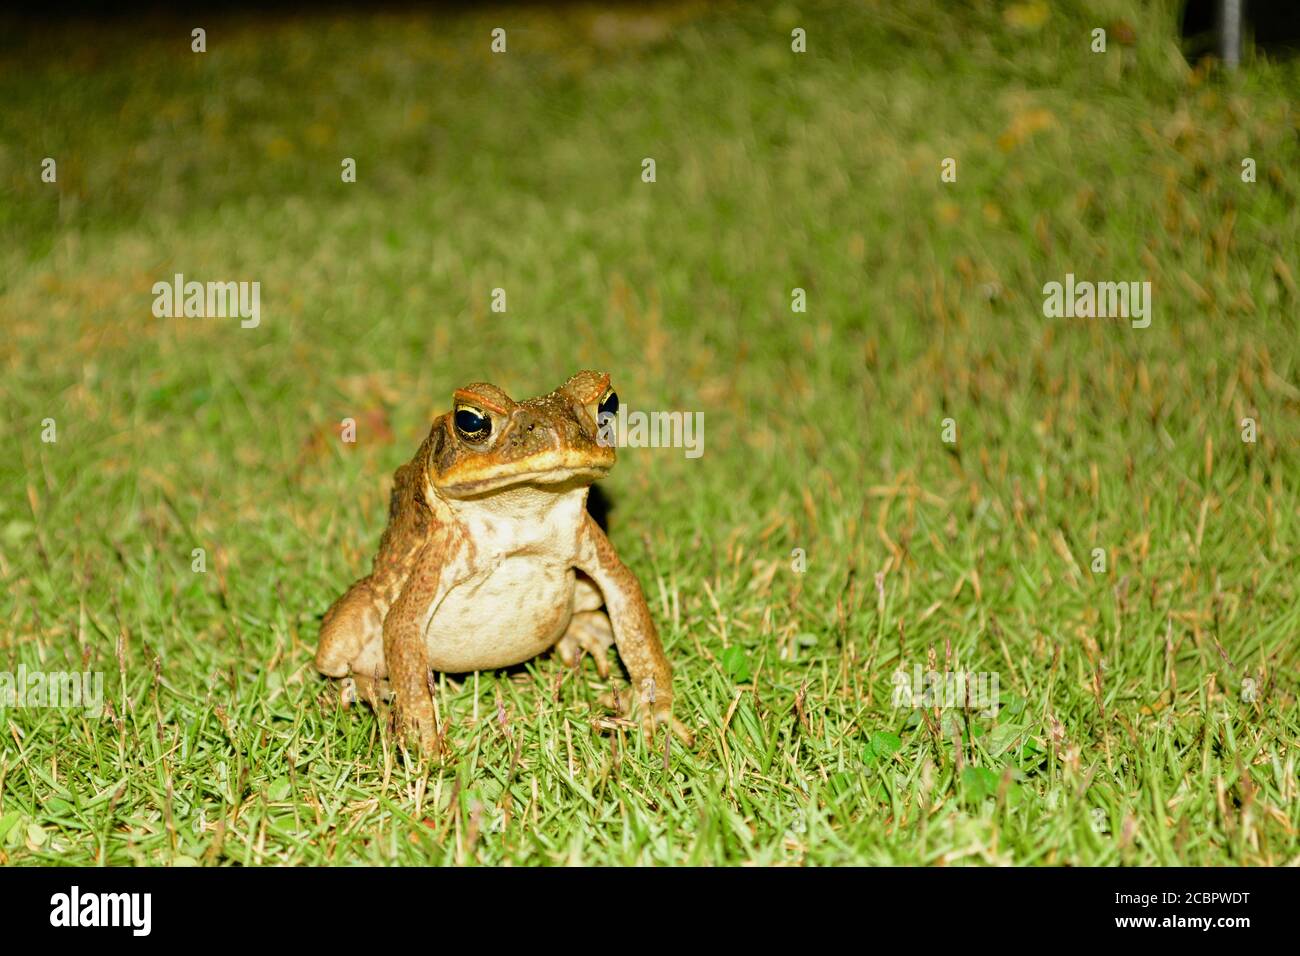 Portrait of a Cane Toads (Rhinella marina). This is a large heavily-built amphibian with dry warty skin. Stock Photo